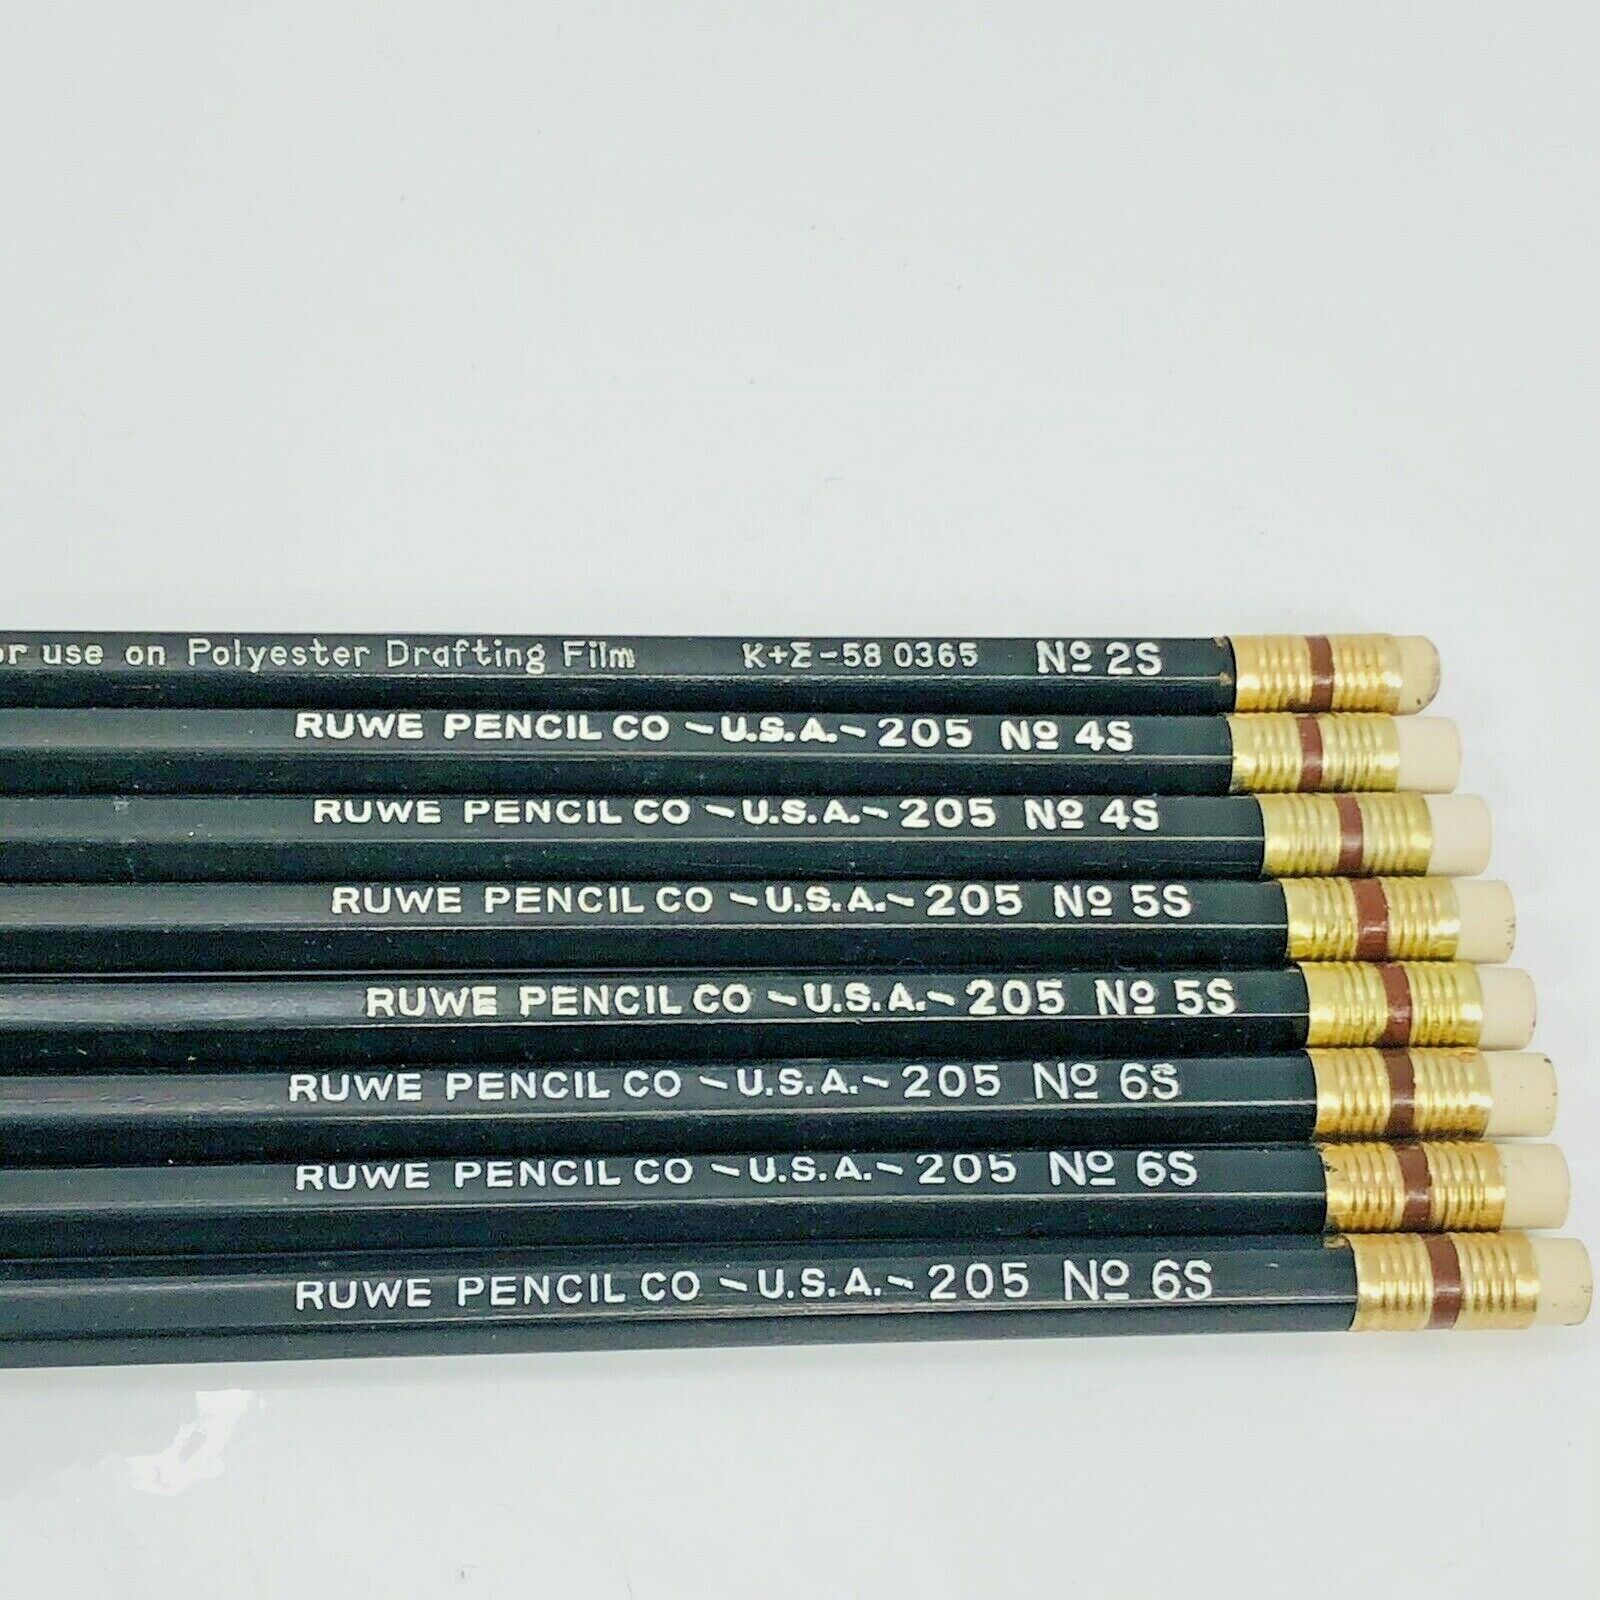 Vintage Ruwe Pencil Co Drafting Film Pencils 205 4S 5S 6S Made USA Lot of 8